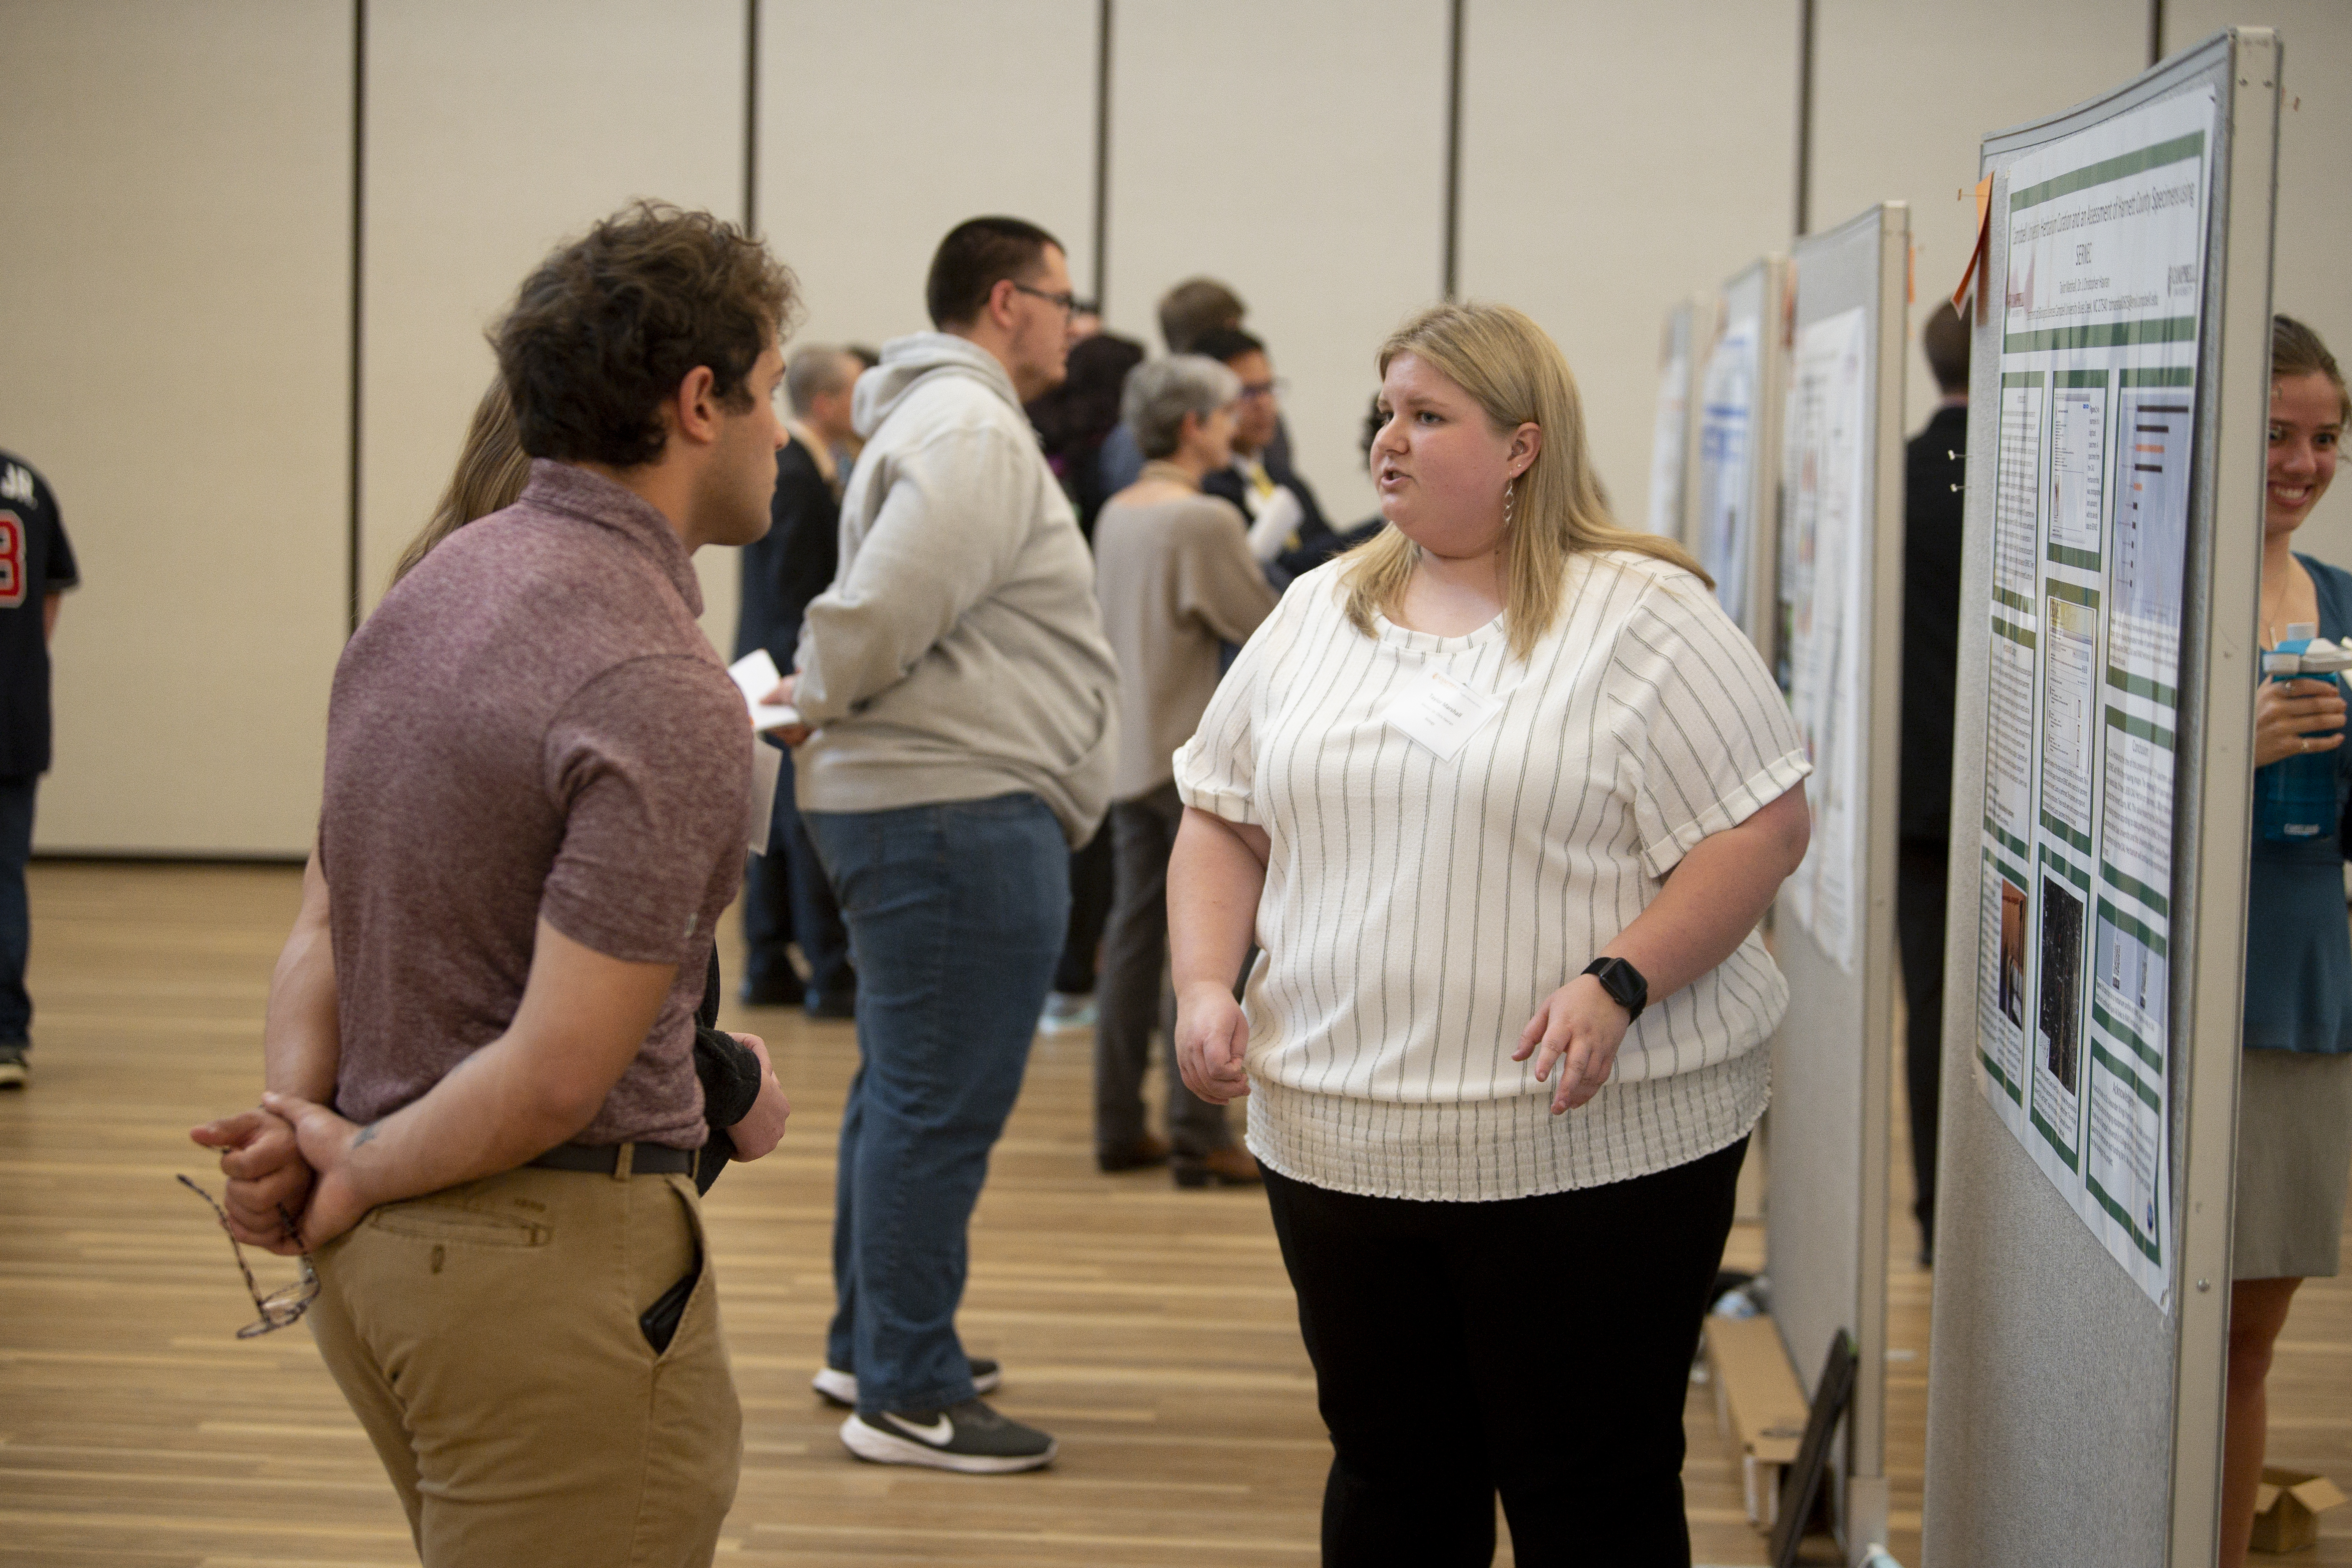 Symposium presenter discusses poster with a student